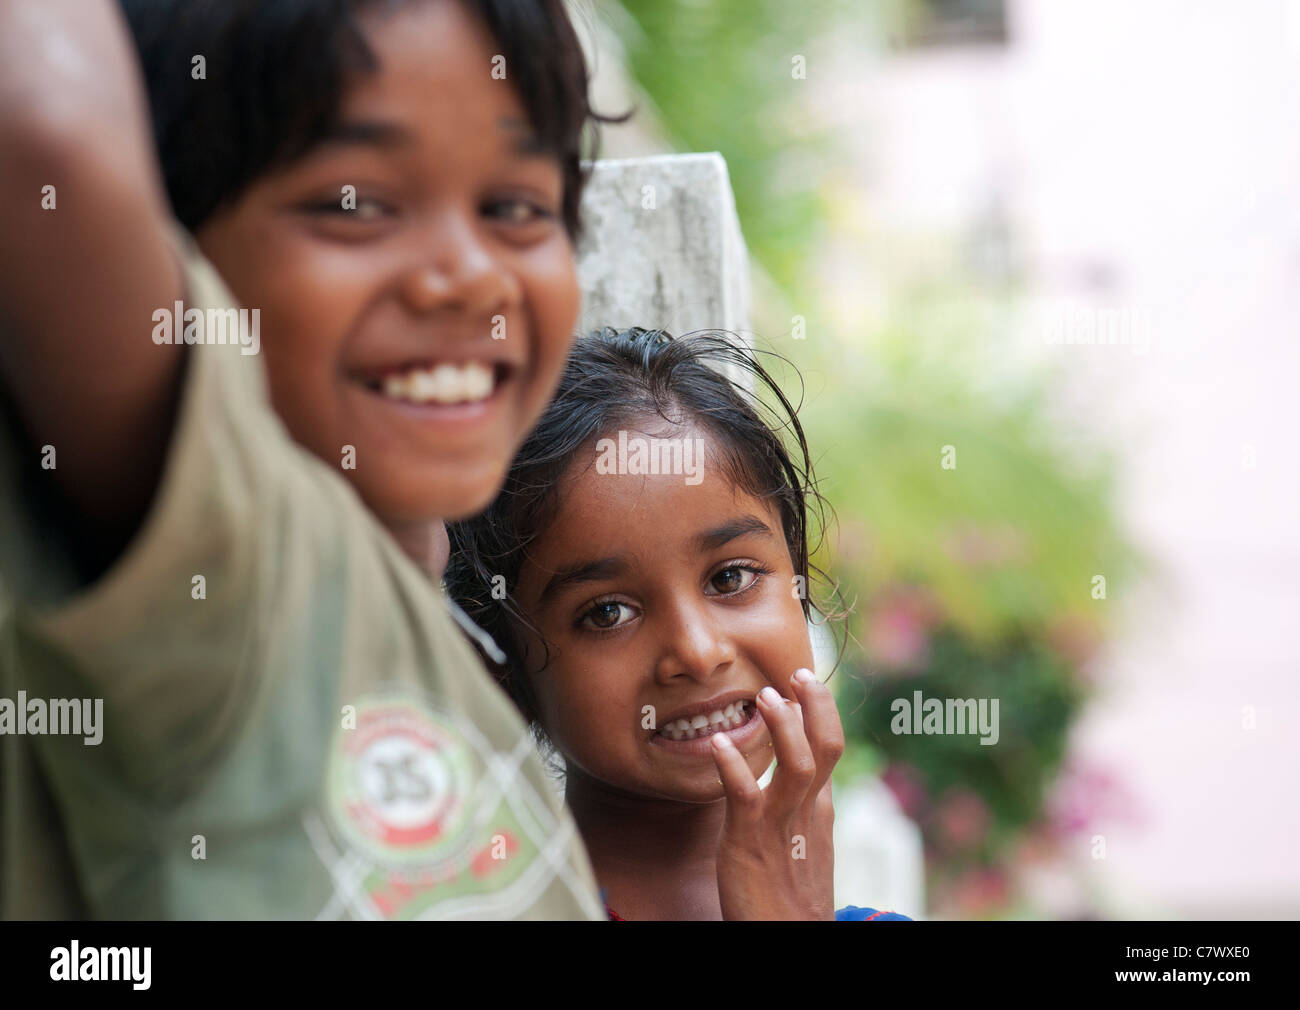 Young poor lower caste Indian street boy and girl. Selective focus. Stock Photo